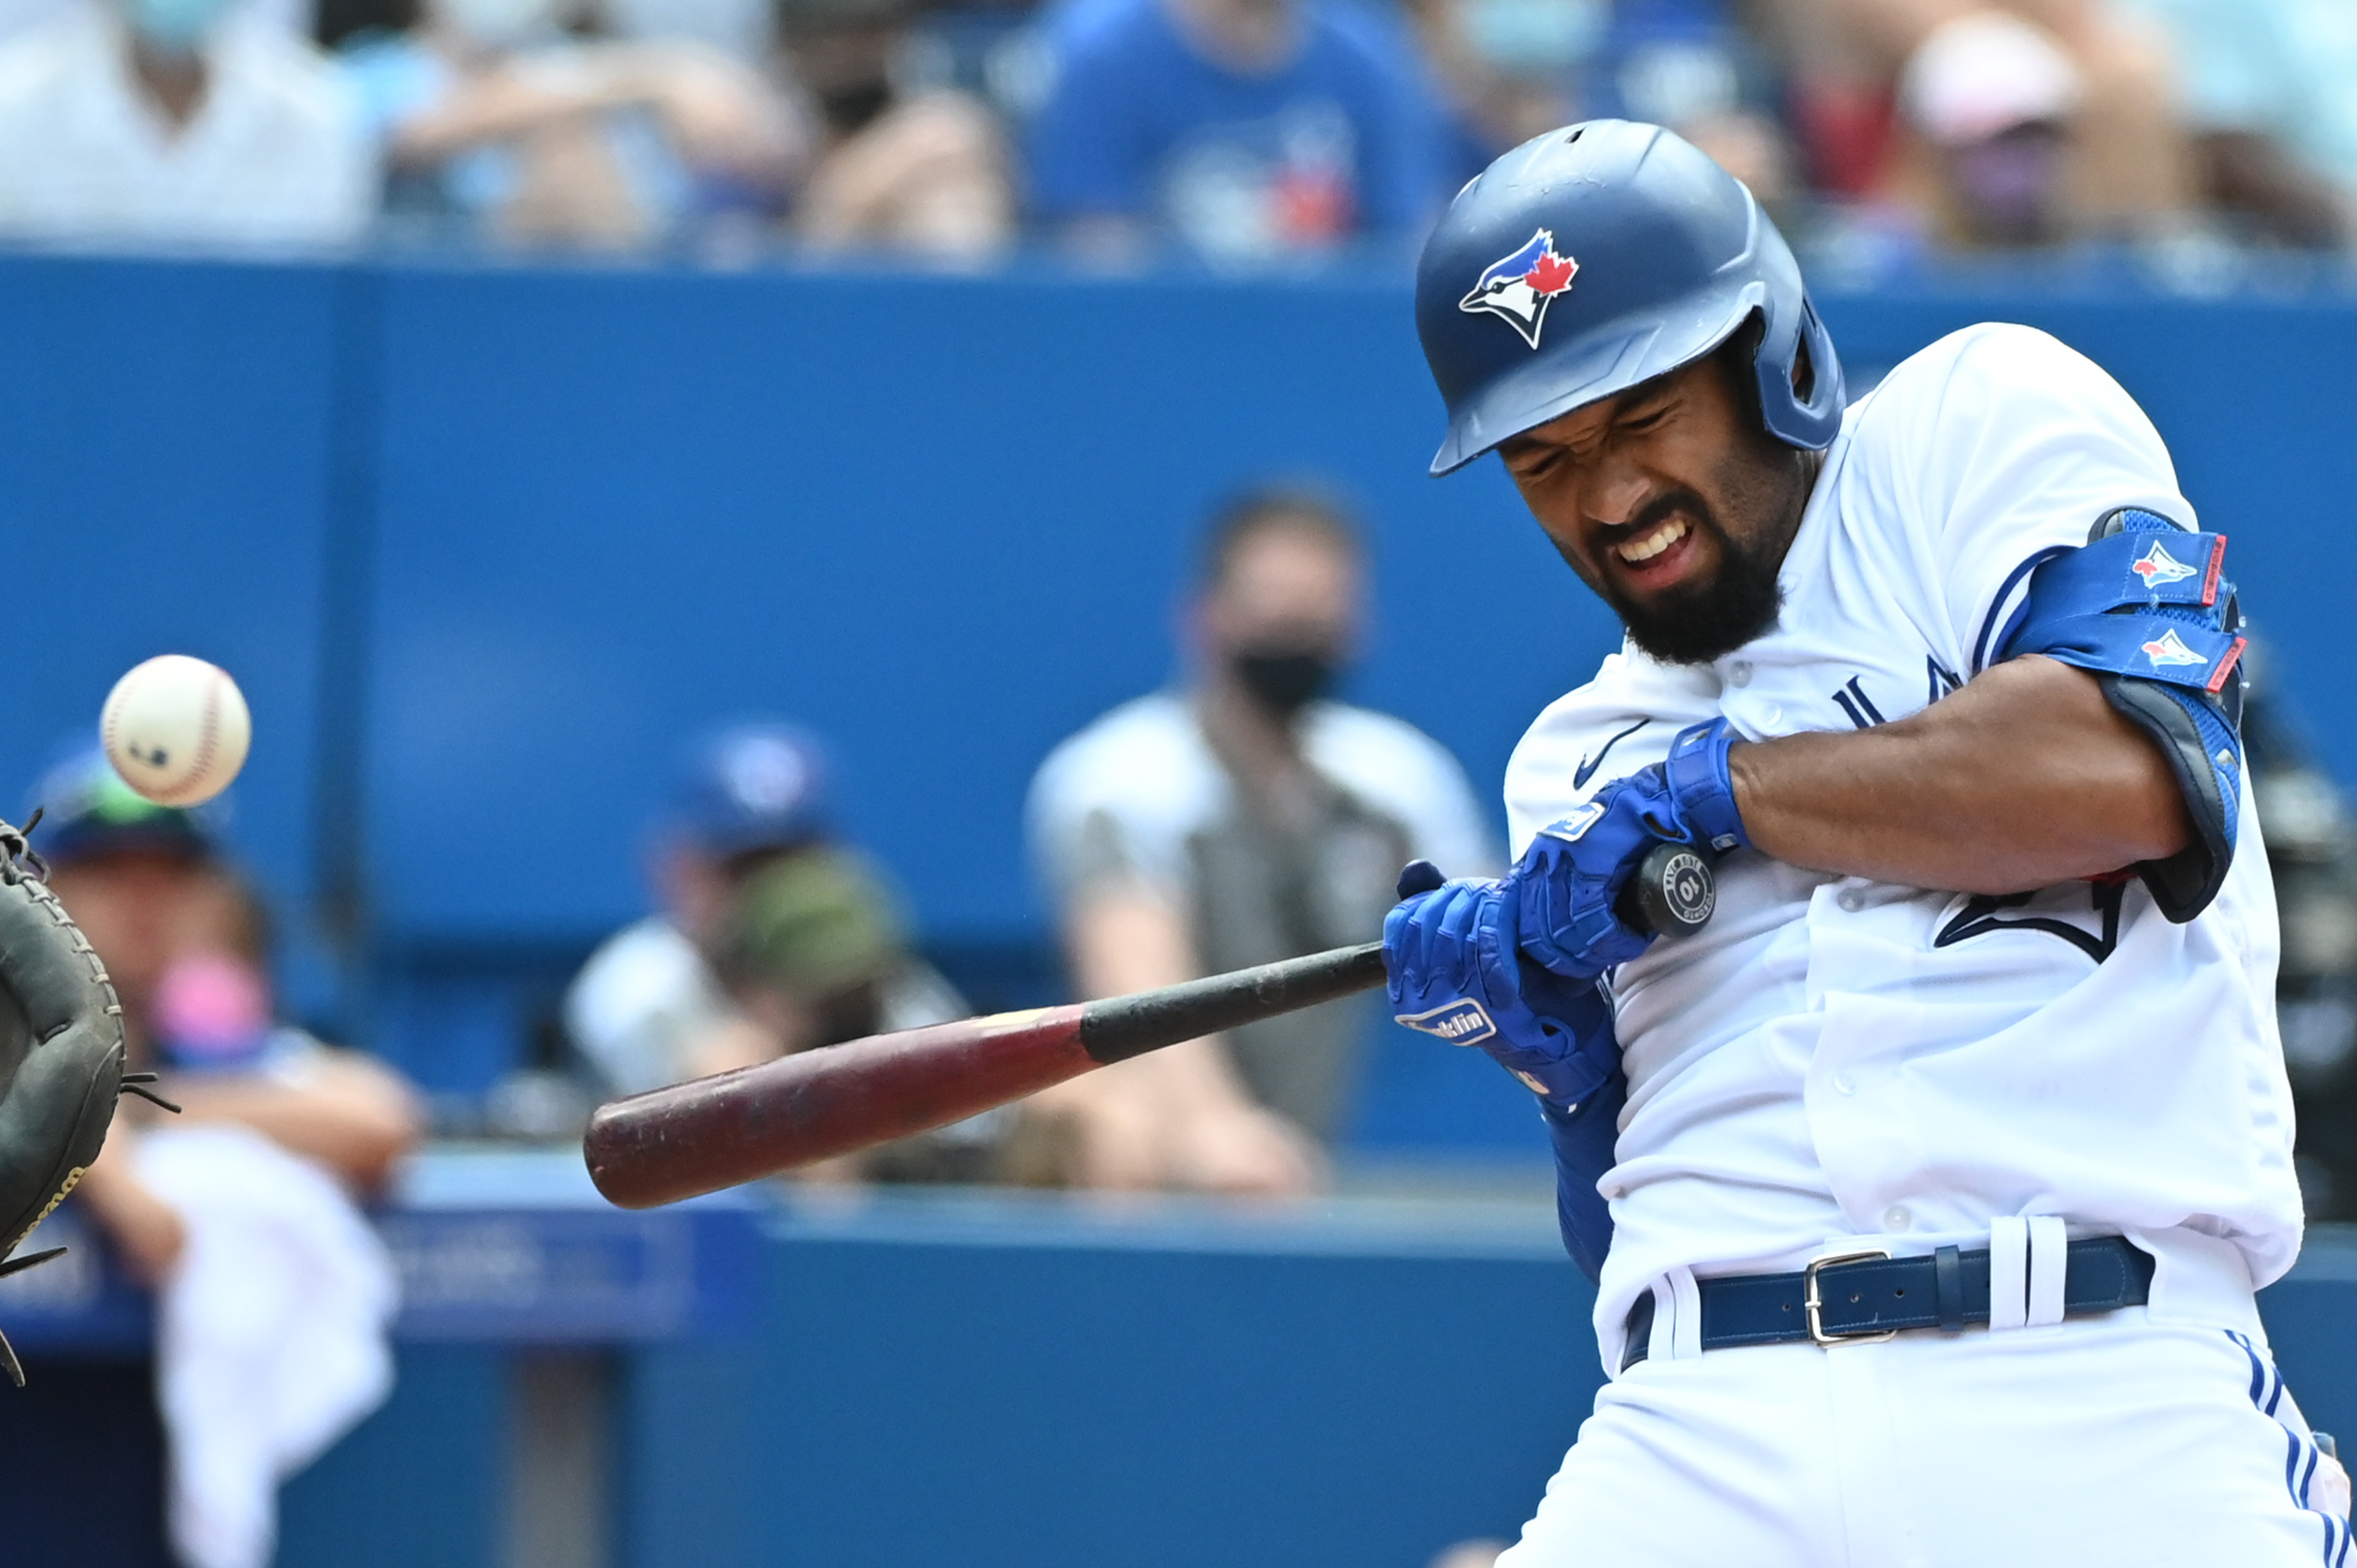 Toronto Blue Jays lose 5-3 to Detroit Tigers after extra innings Globalnews.ca